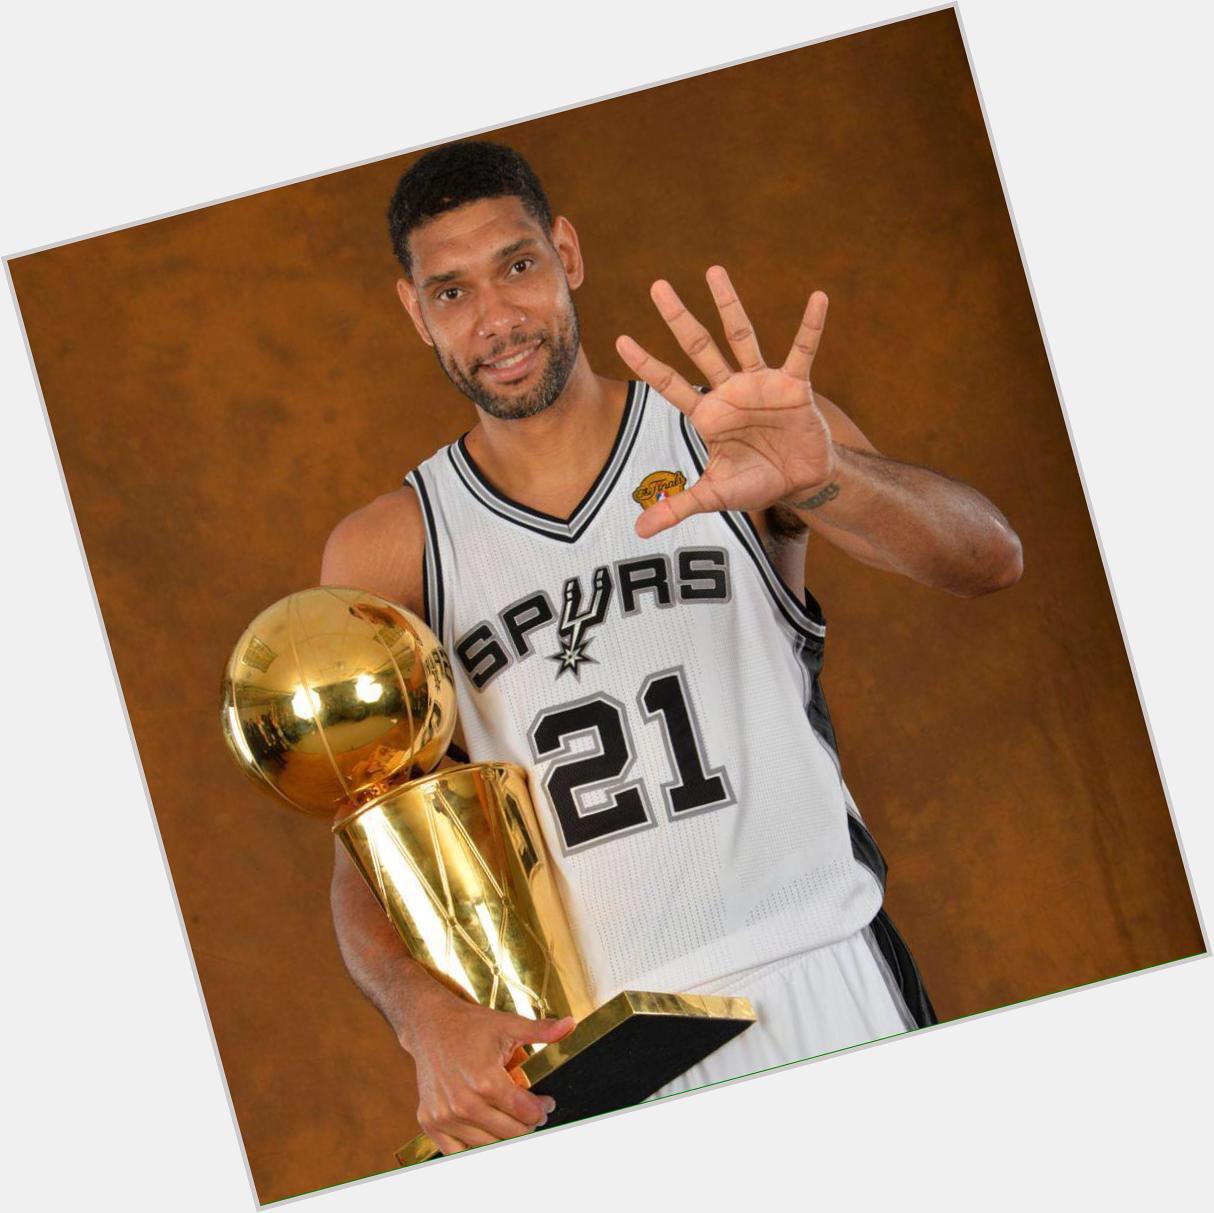 Happy birthday to Father Time himself, 5 time NBA championship player, my man Tim Duncan! 